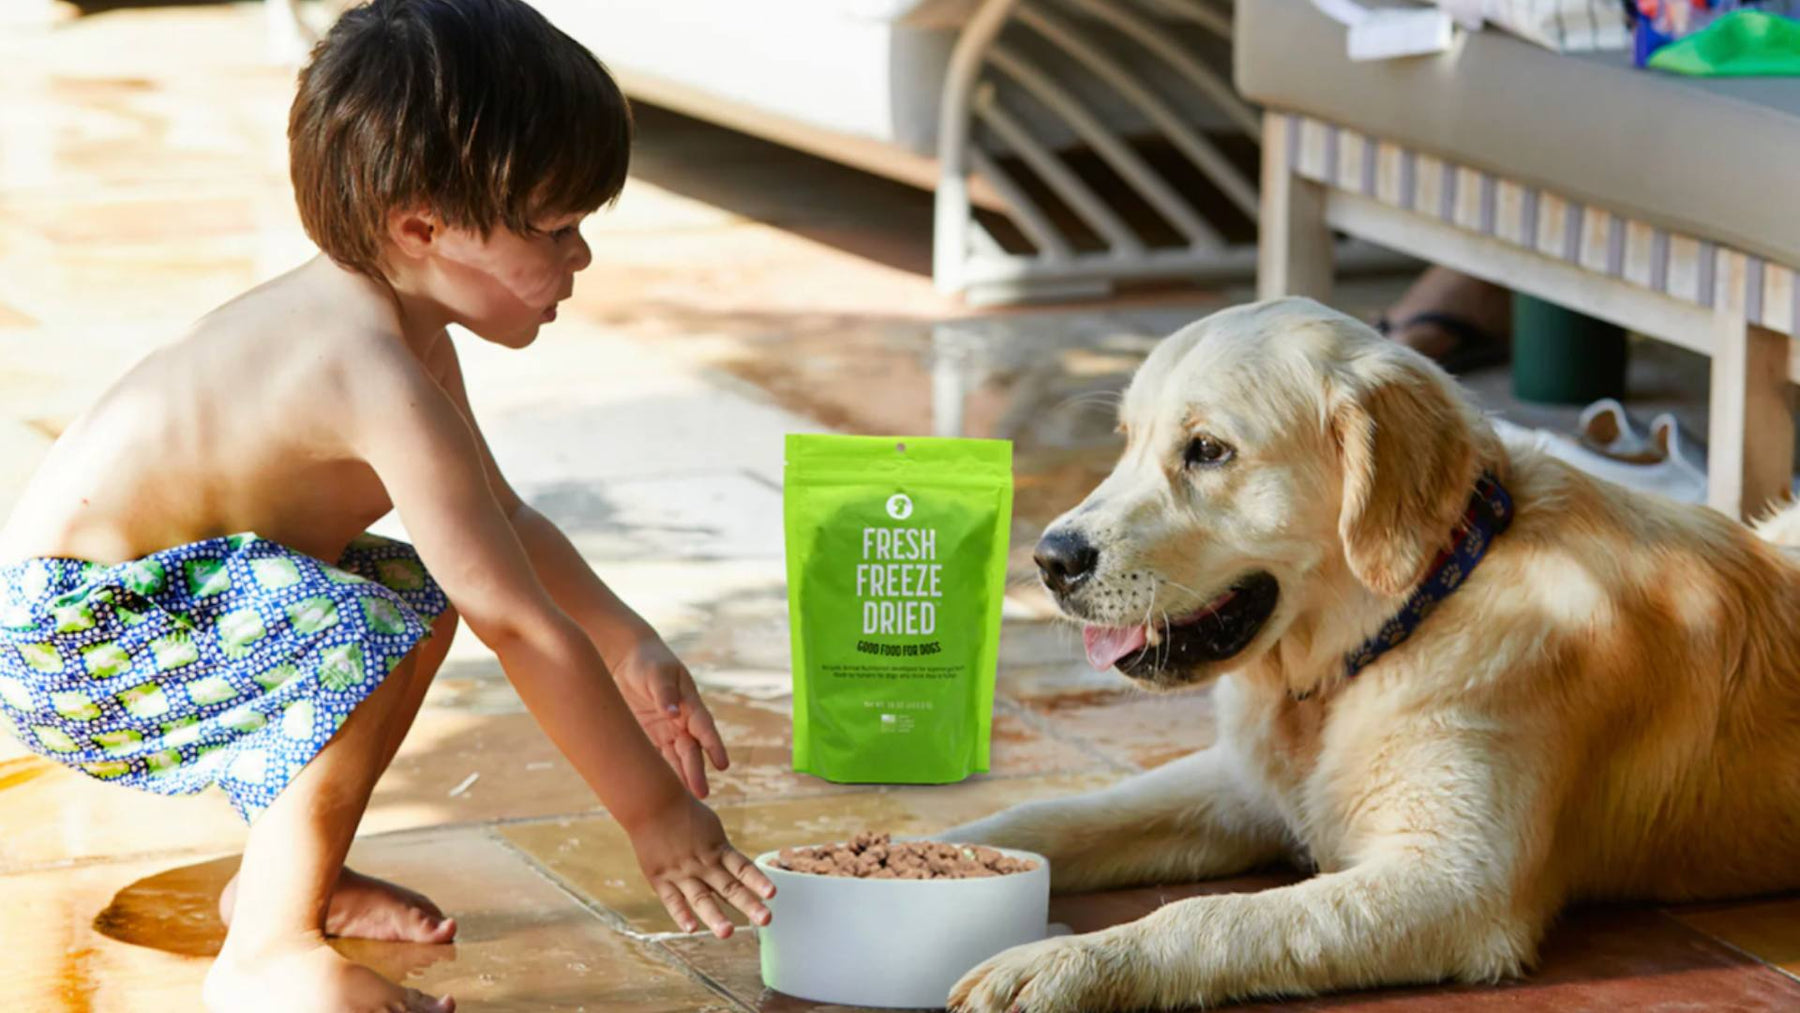 A young boy squats outside next to his dog, who is sitting next to a green bag of Get Joy fresh food.